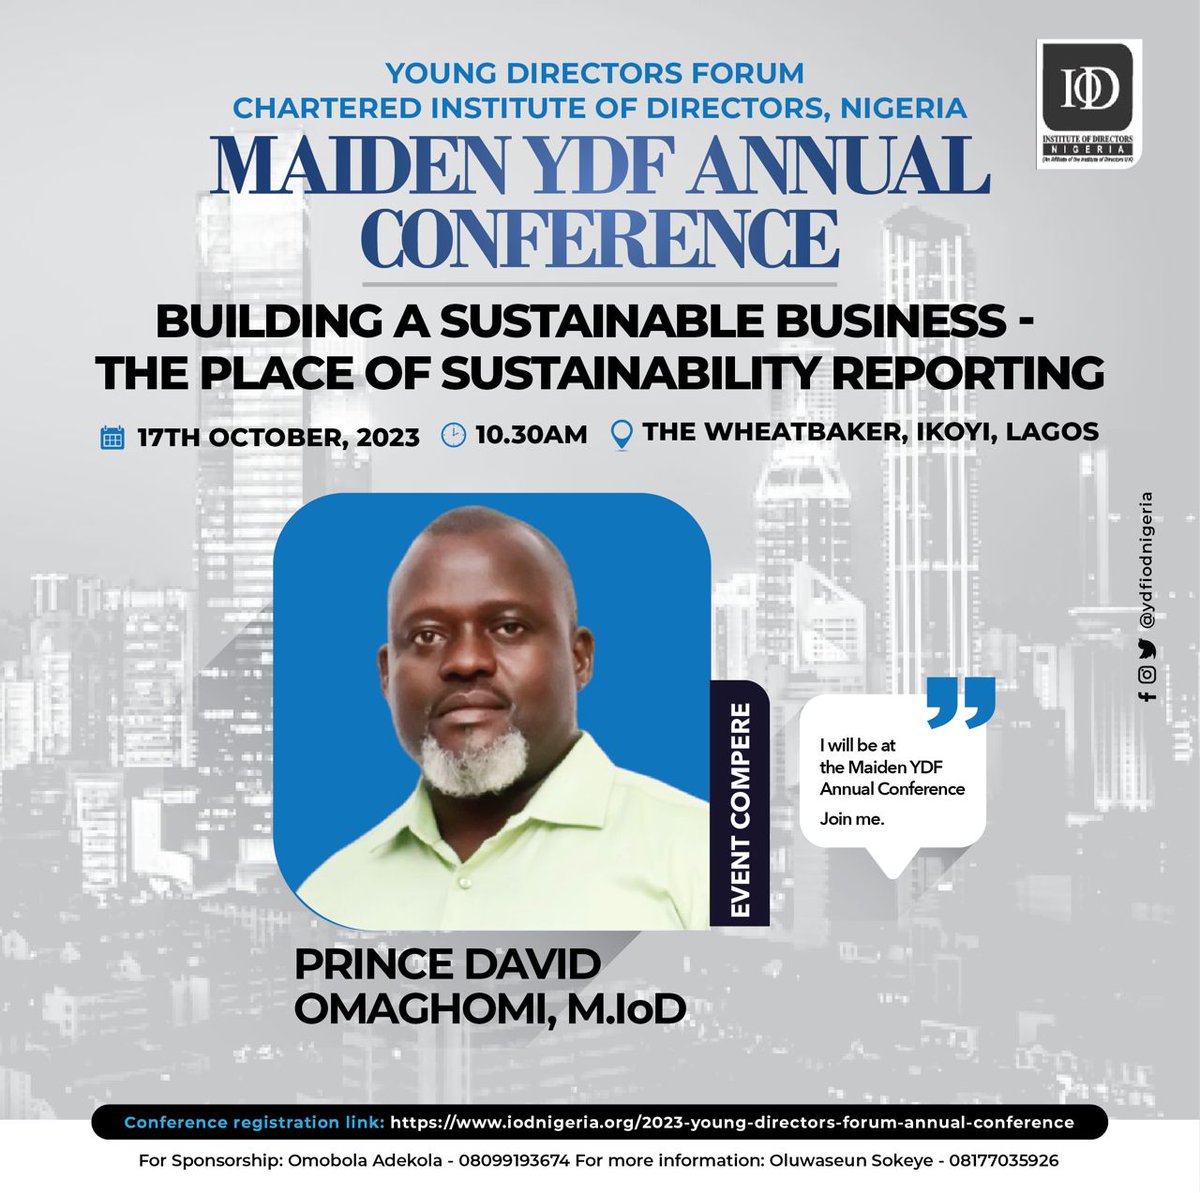 Empower your business at the YDF CIoD Annual Conference on October 17, 2023, at The Wheatbaker, Lagos. Explore sustainability, corporate governance, and more. Reserve your spot now! #YDFConference #BusinessEmpowerment